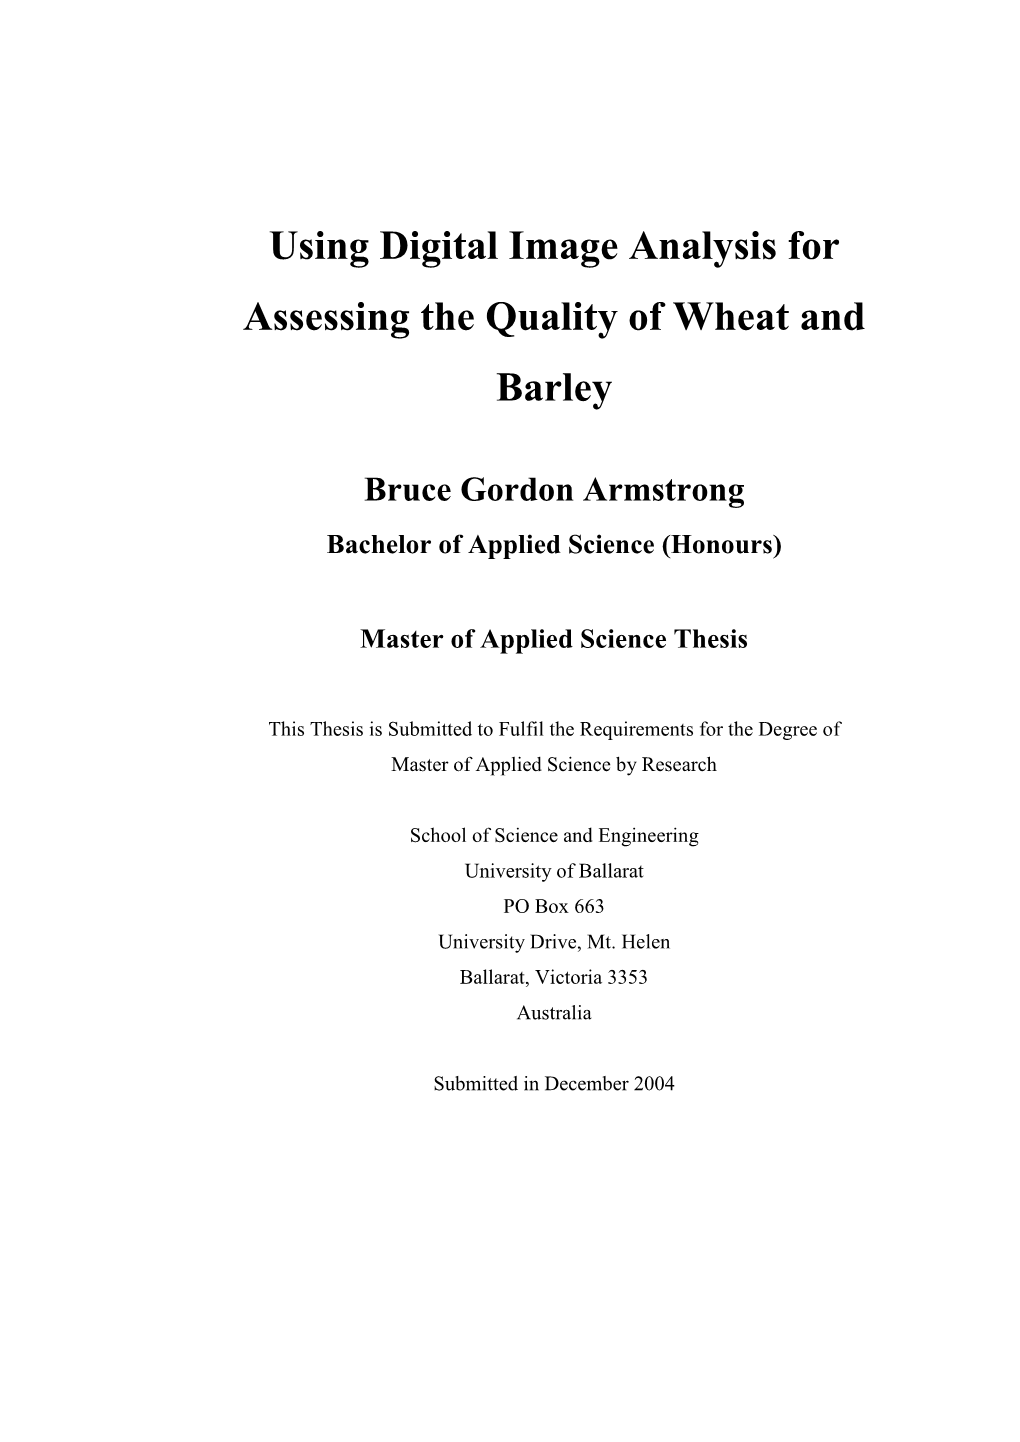 Using Digital Image Analysis for Assessing the Quality of Wheat and Barley